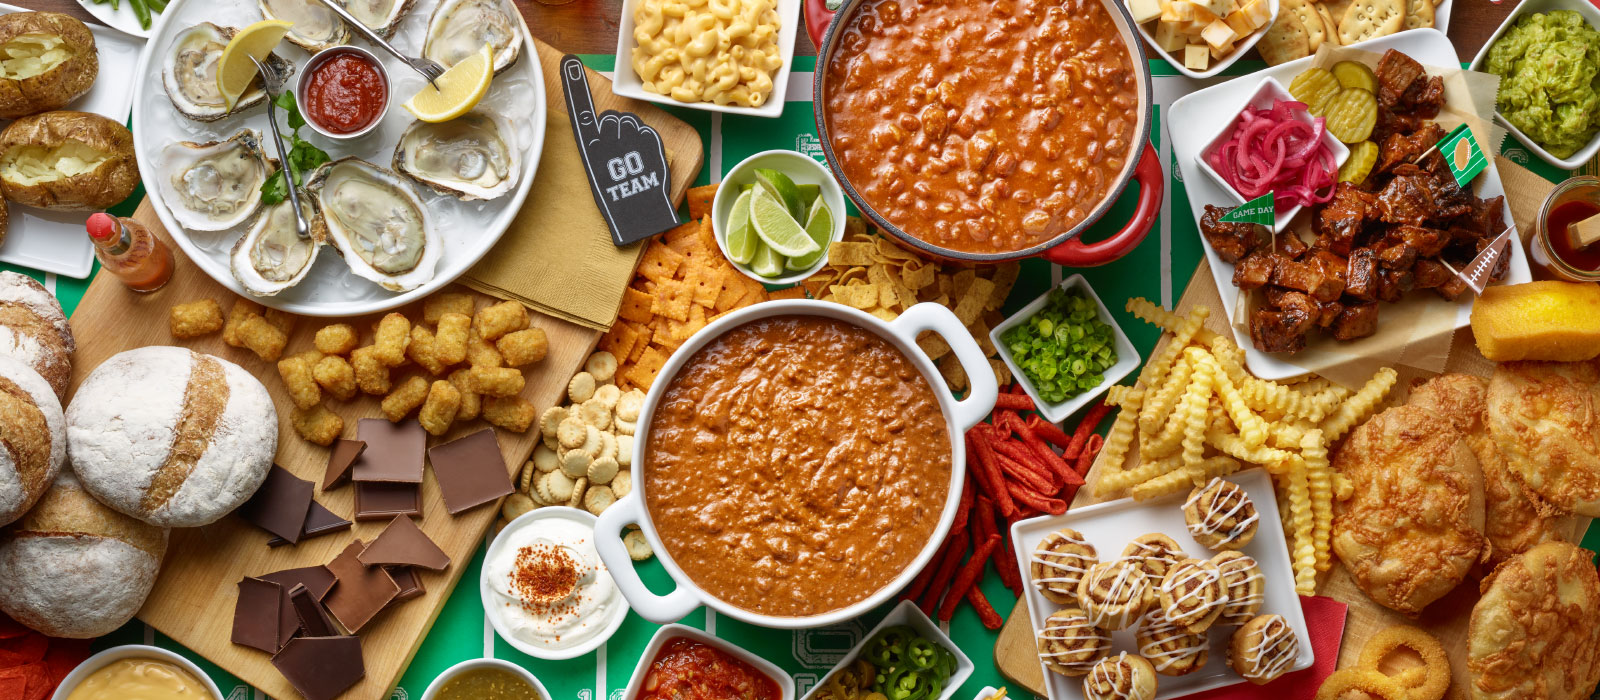 Snacking For The Big Game With HORMEL® Chili Board